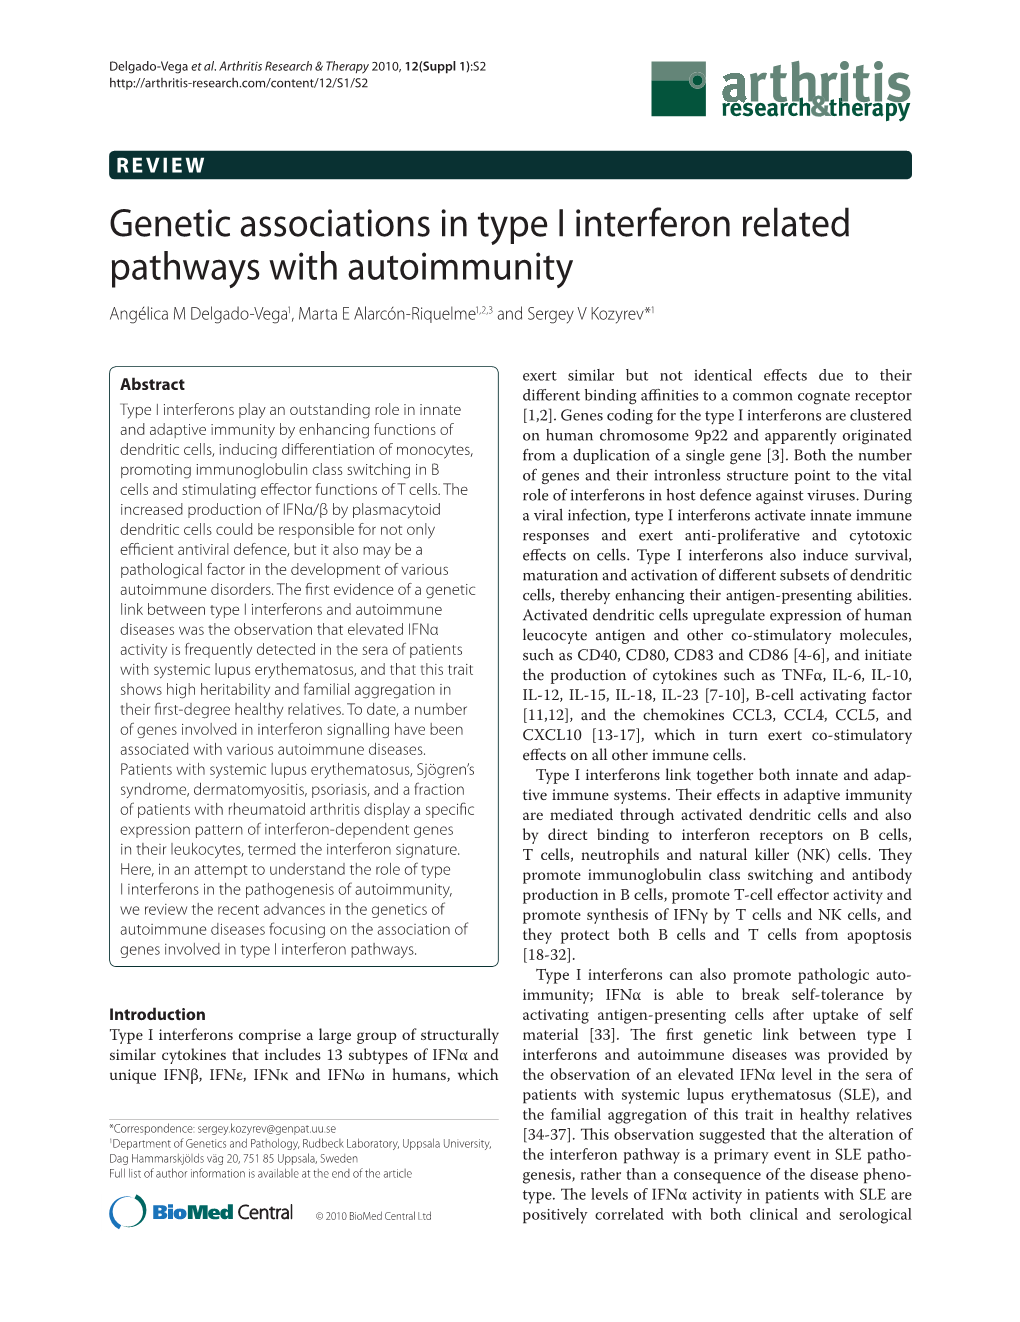 Genetic Associations in Type I Interferon Related Pathways with Autoimmunity